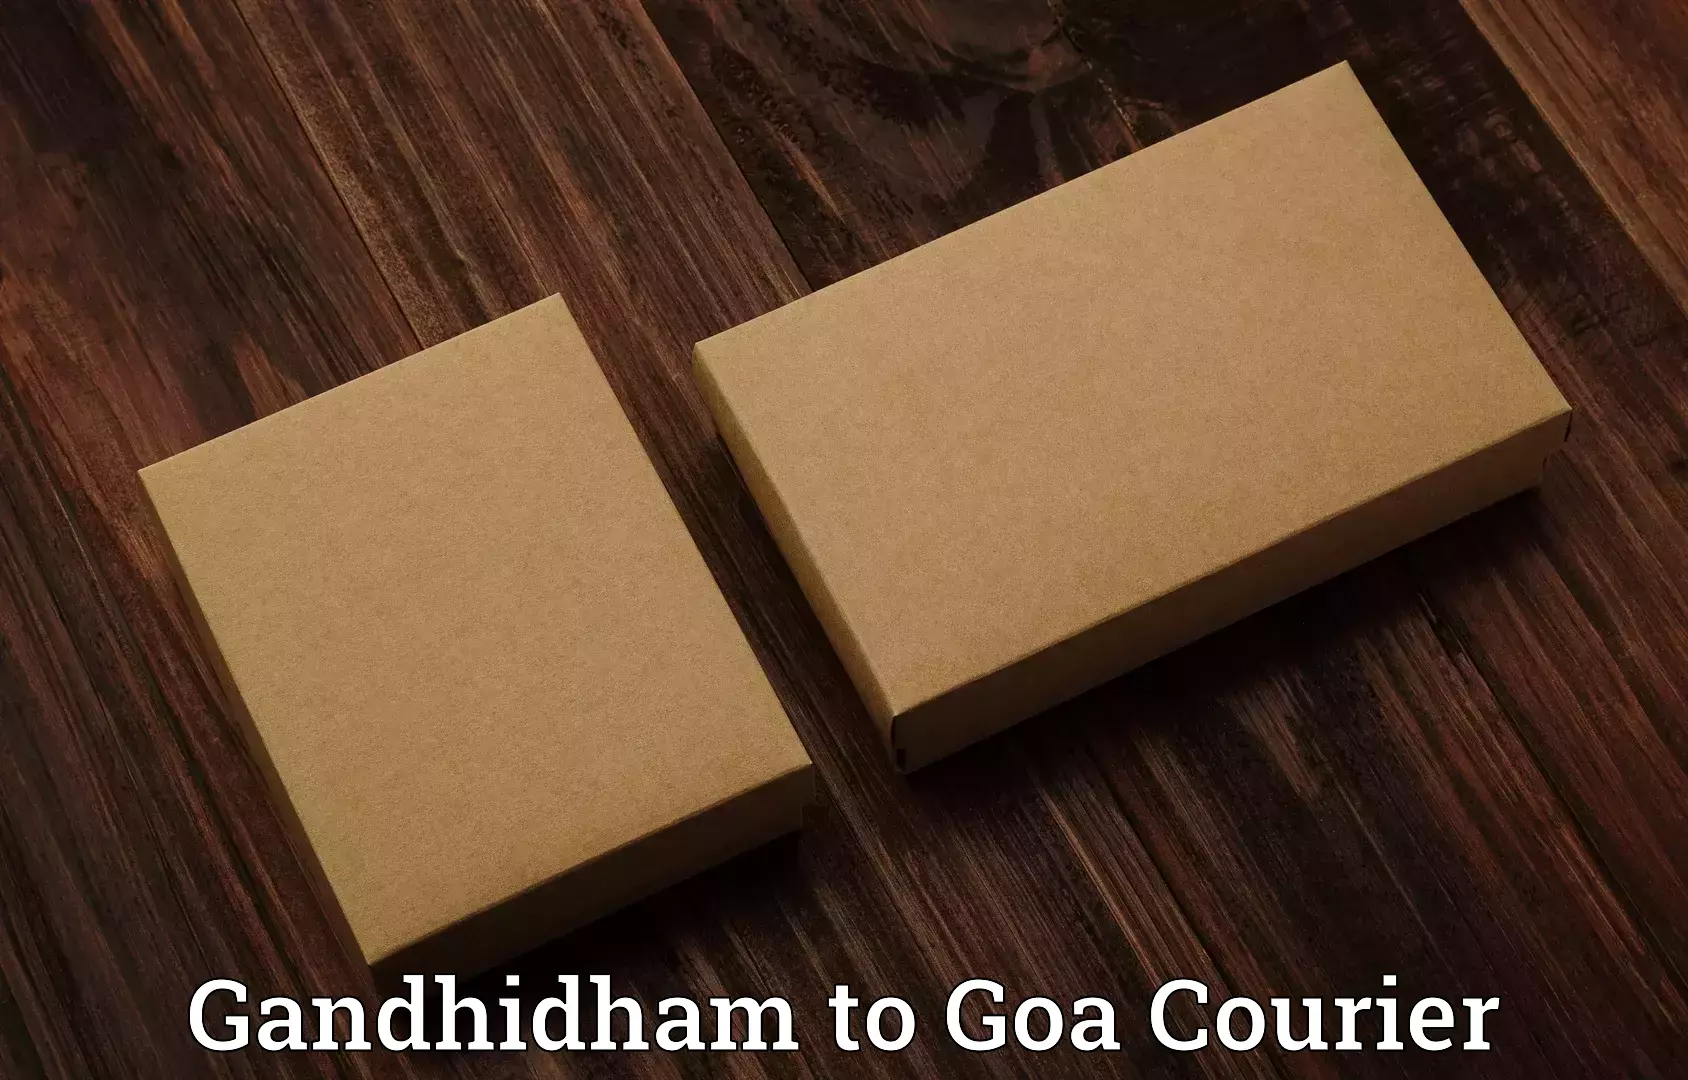 Luggage delivery app Gandhidham to Goa